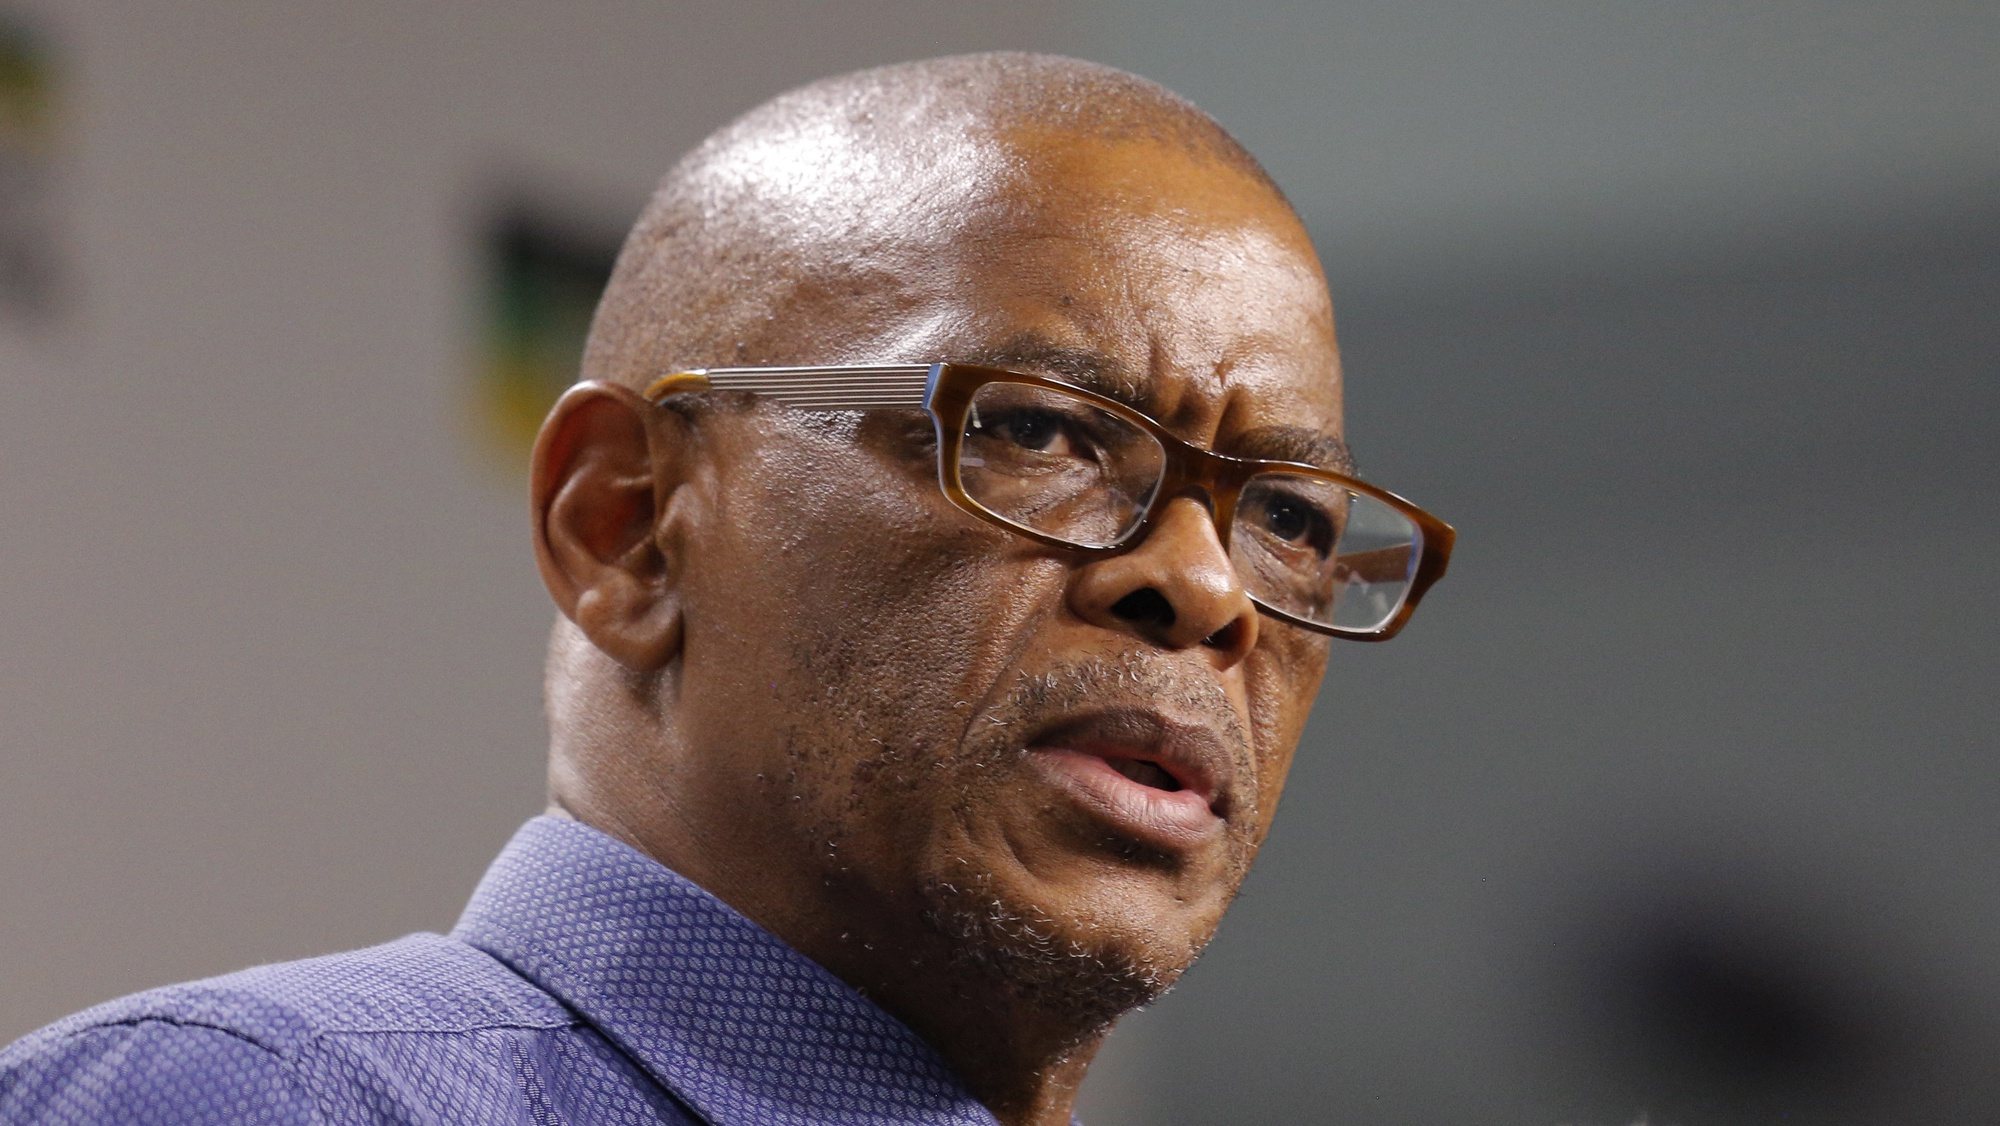 epa08812707 (FILE) - ANC&#039;s Secretary General Ace Magashule addressing the media at the ruling parties&#039; head offices in Johannesburg, South Africa, 13 February 2018 (reissued 11 November 2020). A warrant for arrest has been issued for Ace Magashule and he is due to appear in court on 13 November. This is in connection with corruption which has been a major issue in the ruling party since the end of Aparthied rule. The warrant has been issued in relation to Magashule&#039;s alleged role in a  US dlrs 15m contract to find and remove asbestos from homes in disadvantaged neighbourhoods in the Free State province.  EPA/KIM LUDBROOK